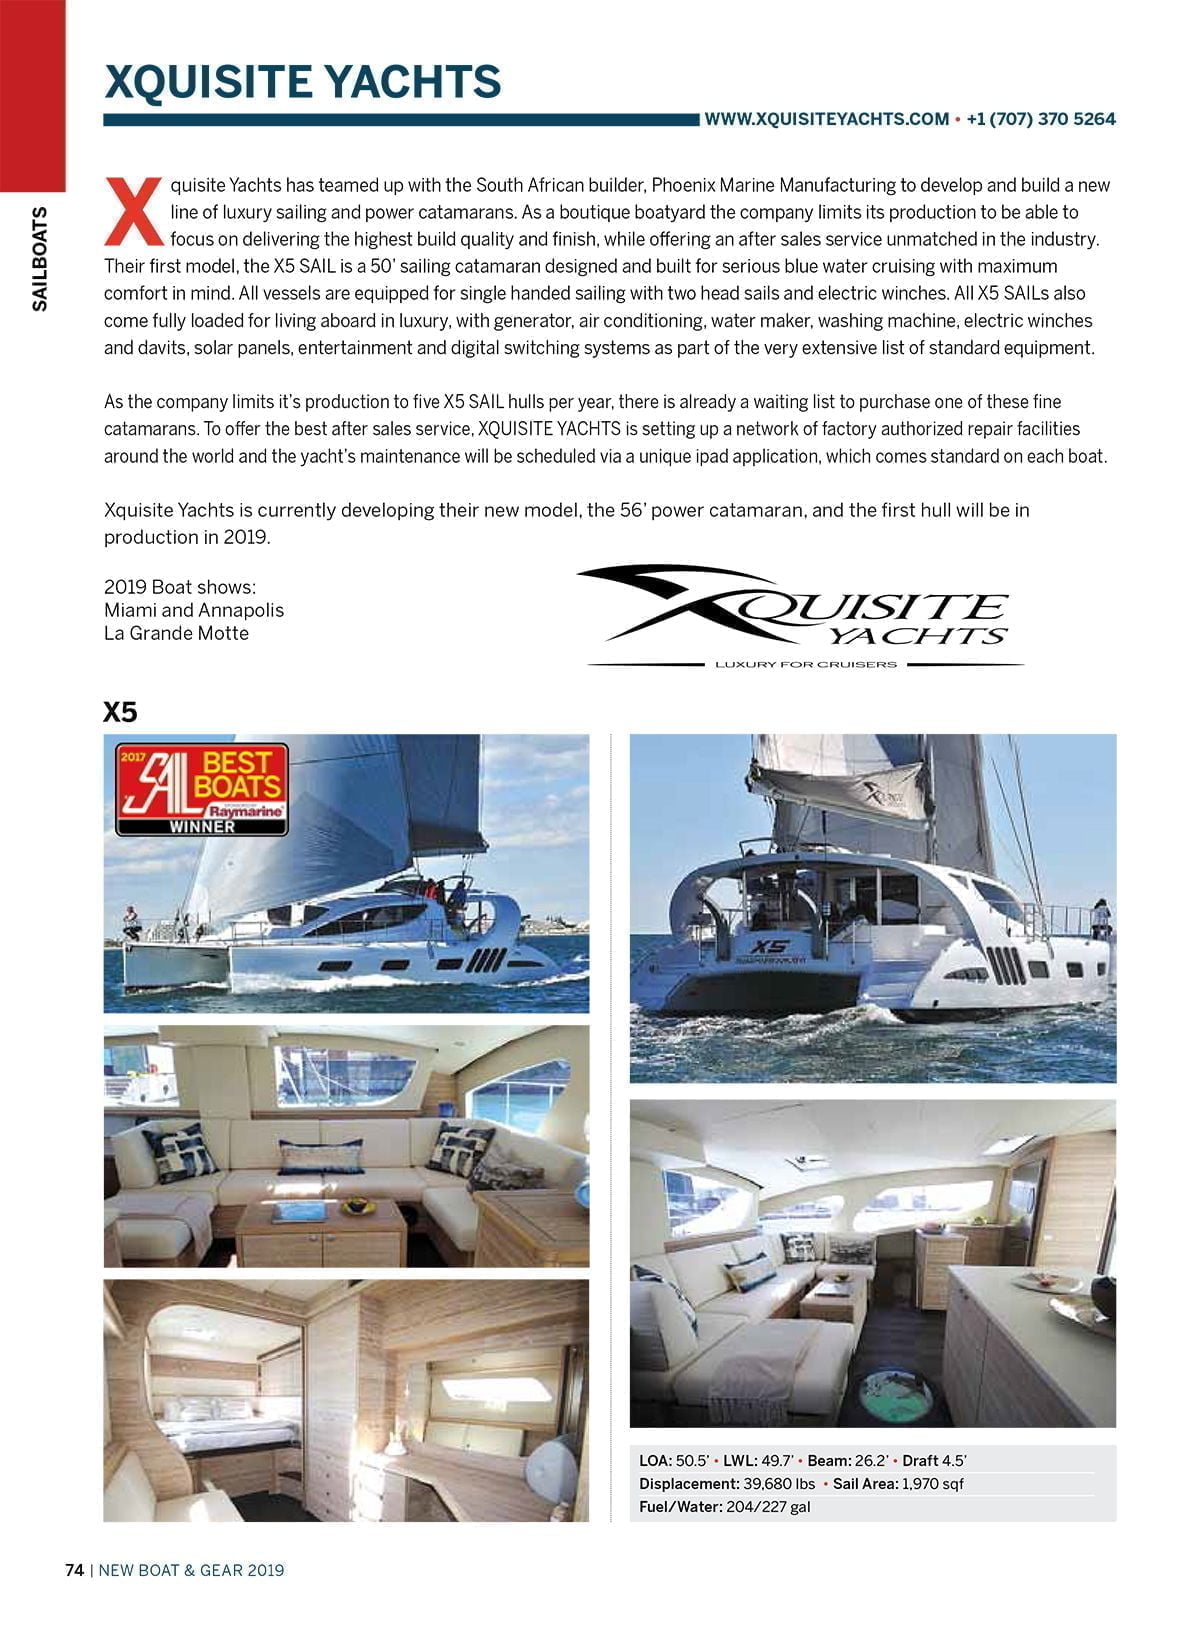 Xquisite X5 Sail in SAIL magazine 2019 Buyer's Guide